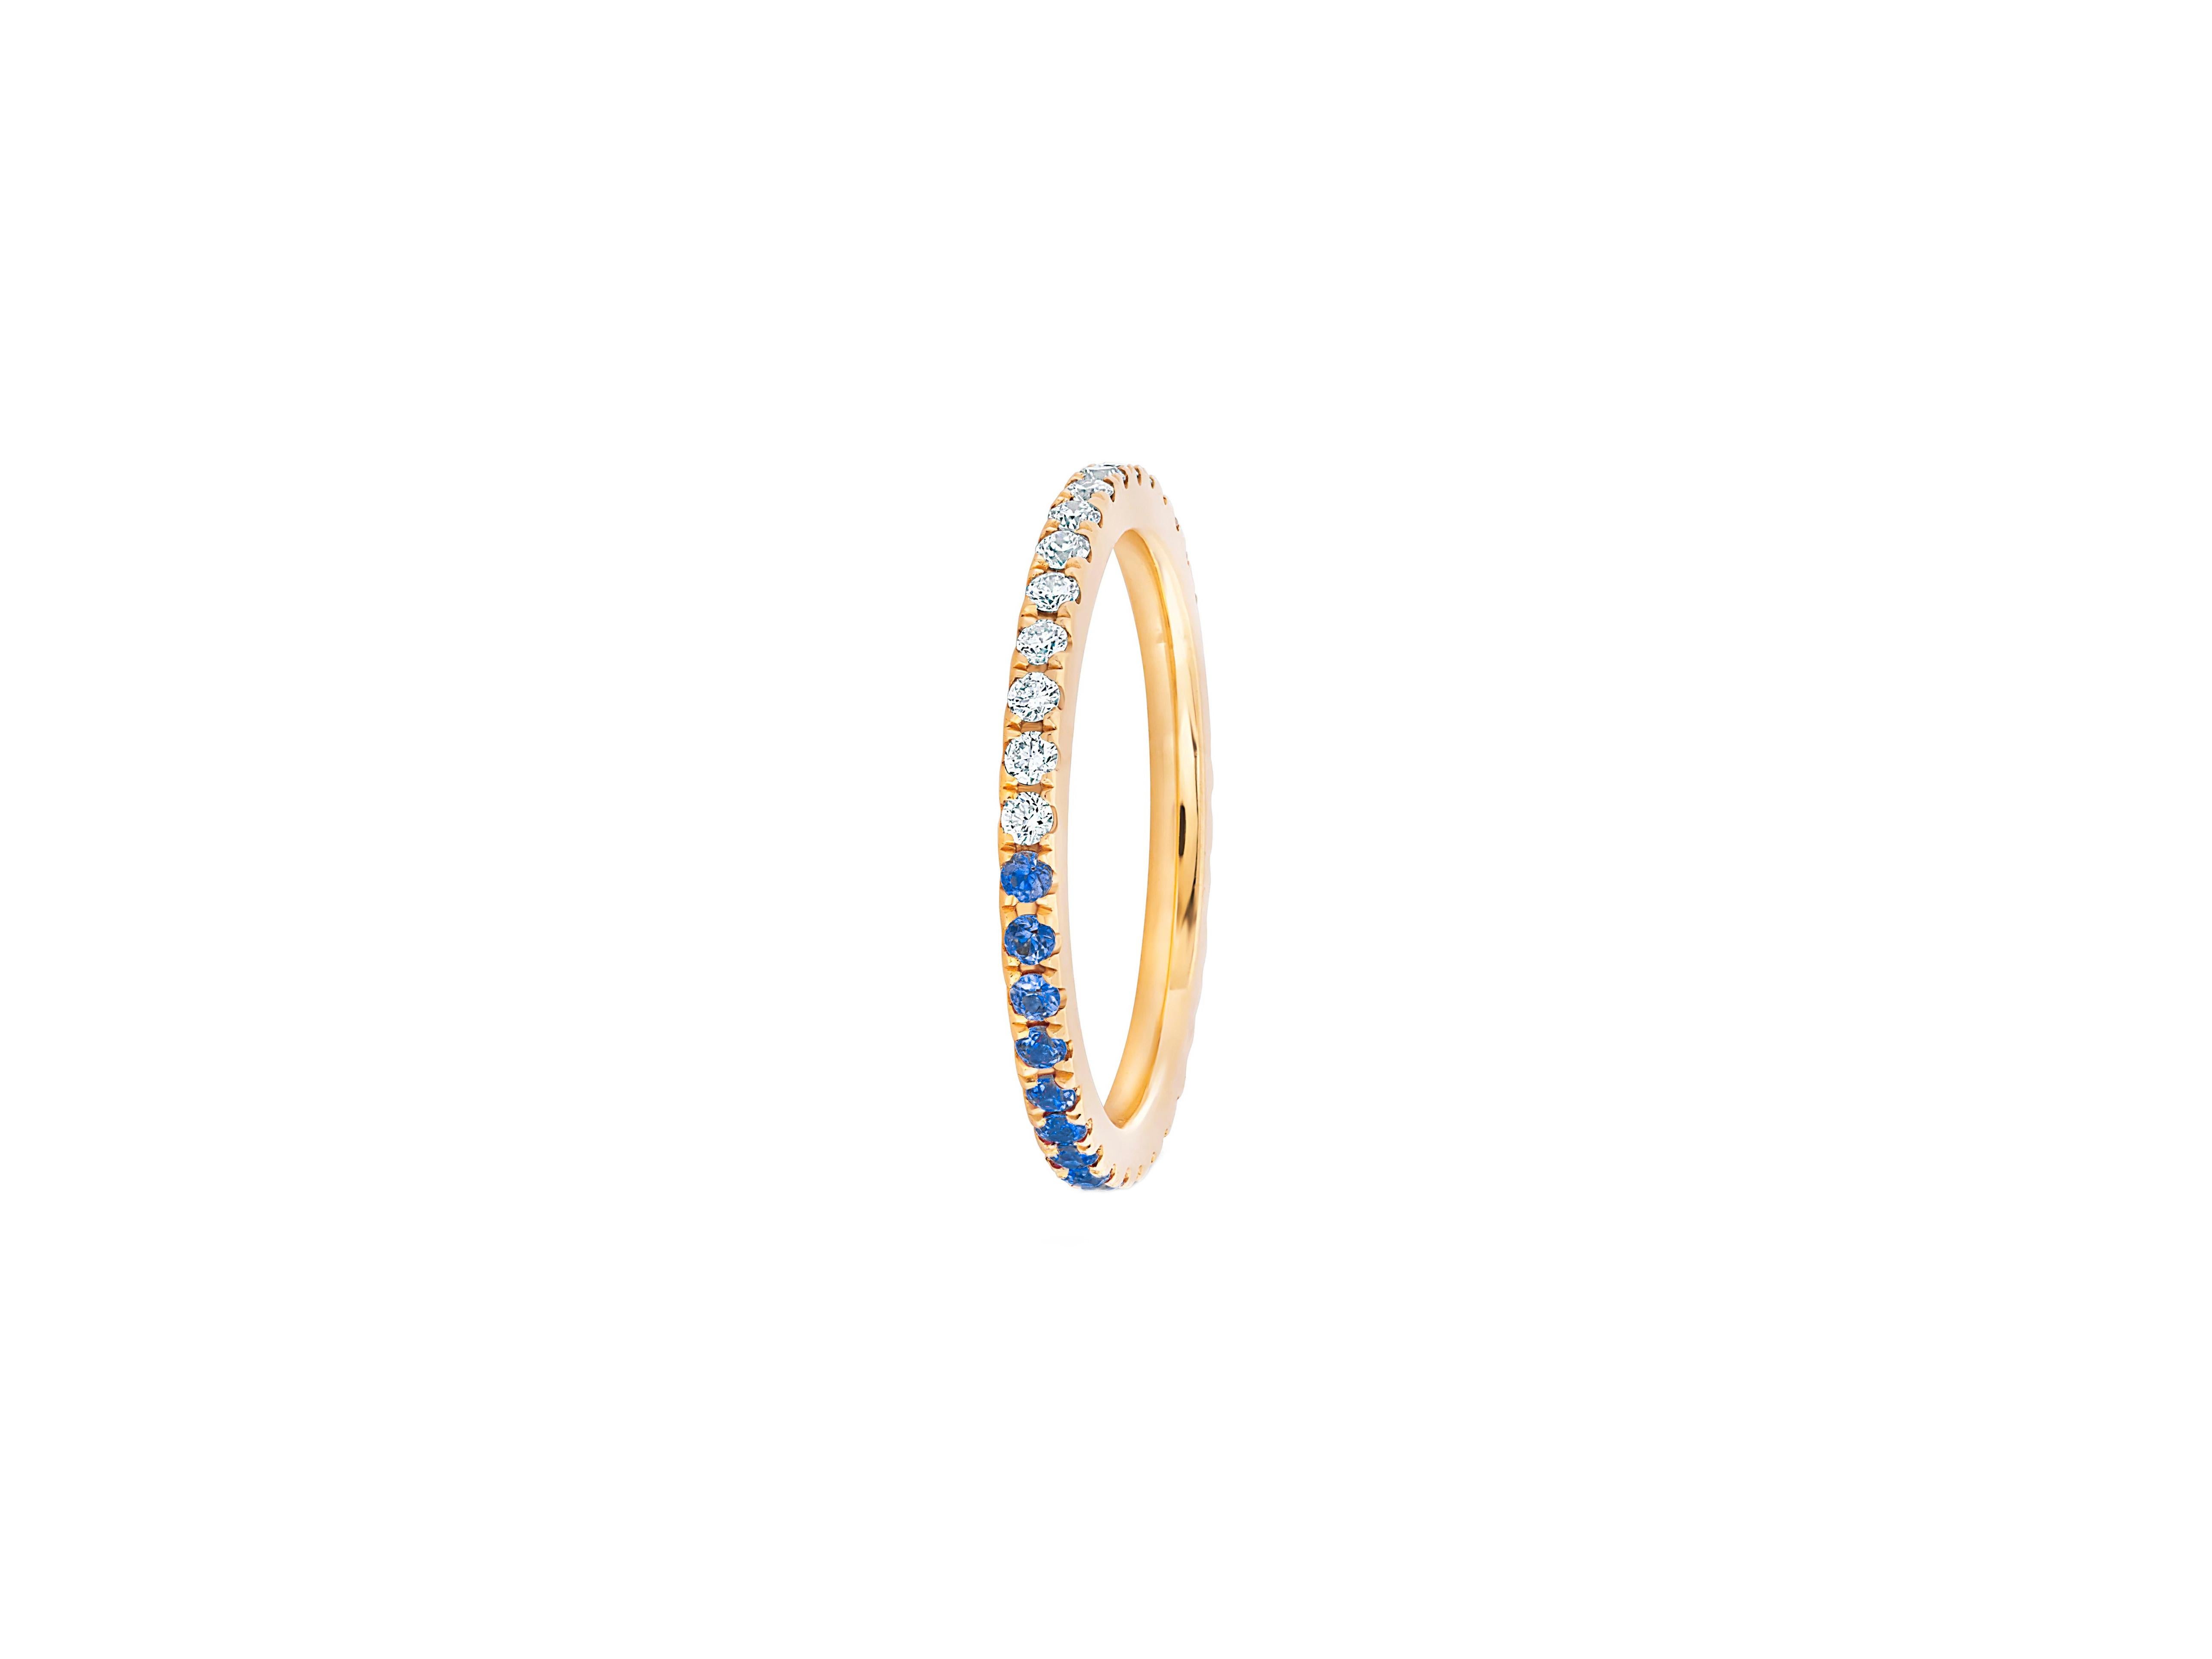 Full eternity moissanite, lab sapphire 14k gold  band.
Ombre Blue Lab Sapphire and Moissanite 14k gold Eternity Band. Mix color eternity 14k gold ring band. Two side wearable eternity ring.

Metal: 14k gold
Weight: 2 gr depends from